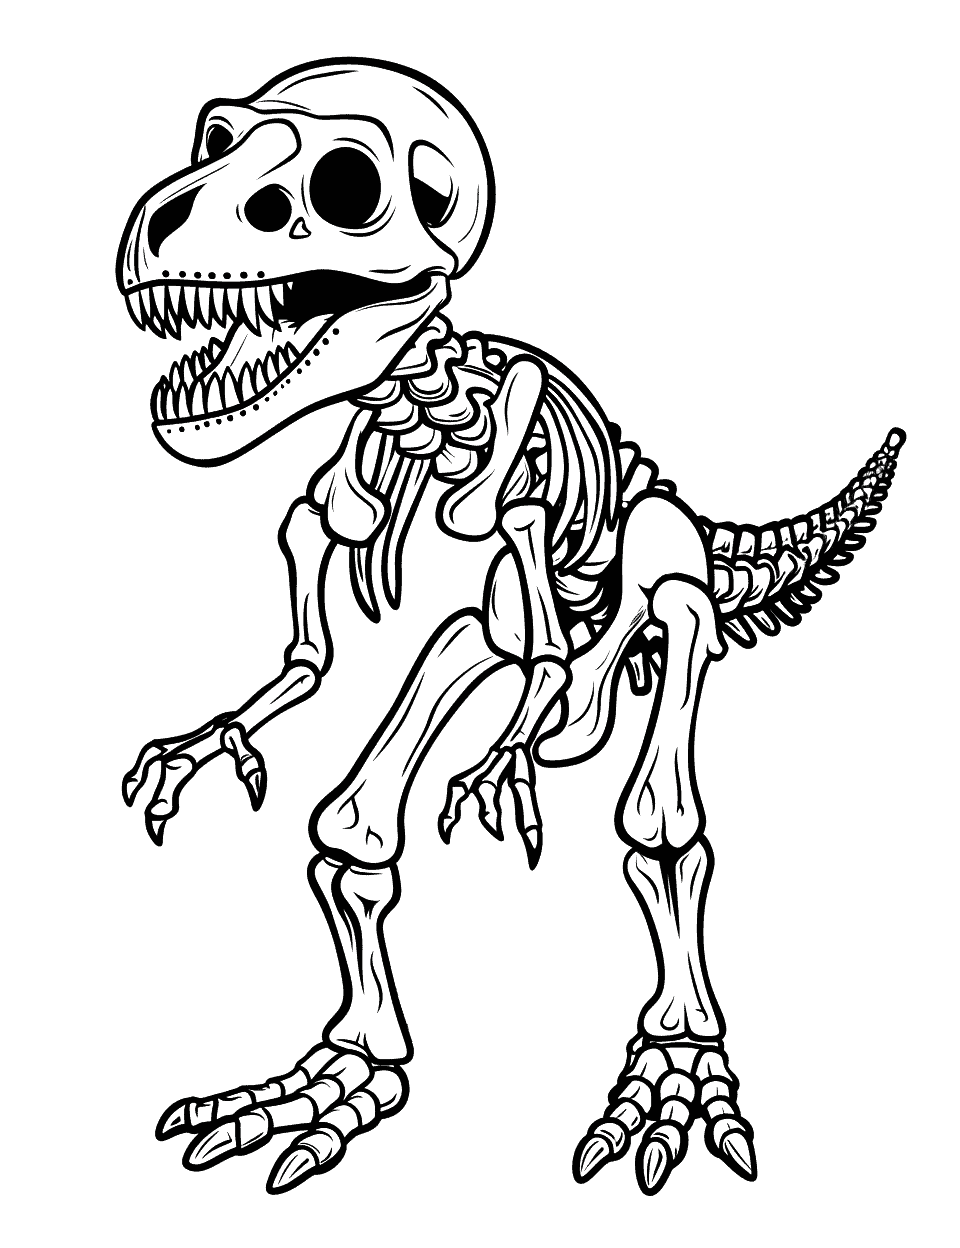 T-Rex Skeleton Roaring Coloring Page - A T-Rex dinosaur skeleton in a roaring pose, showing its fearsome teeth.